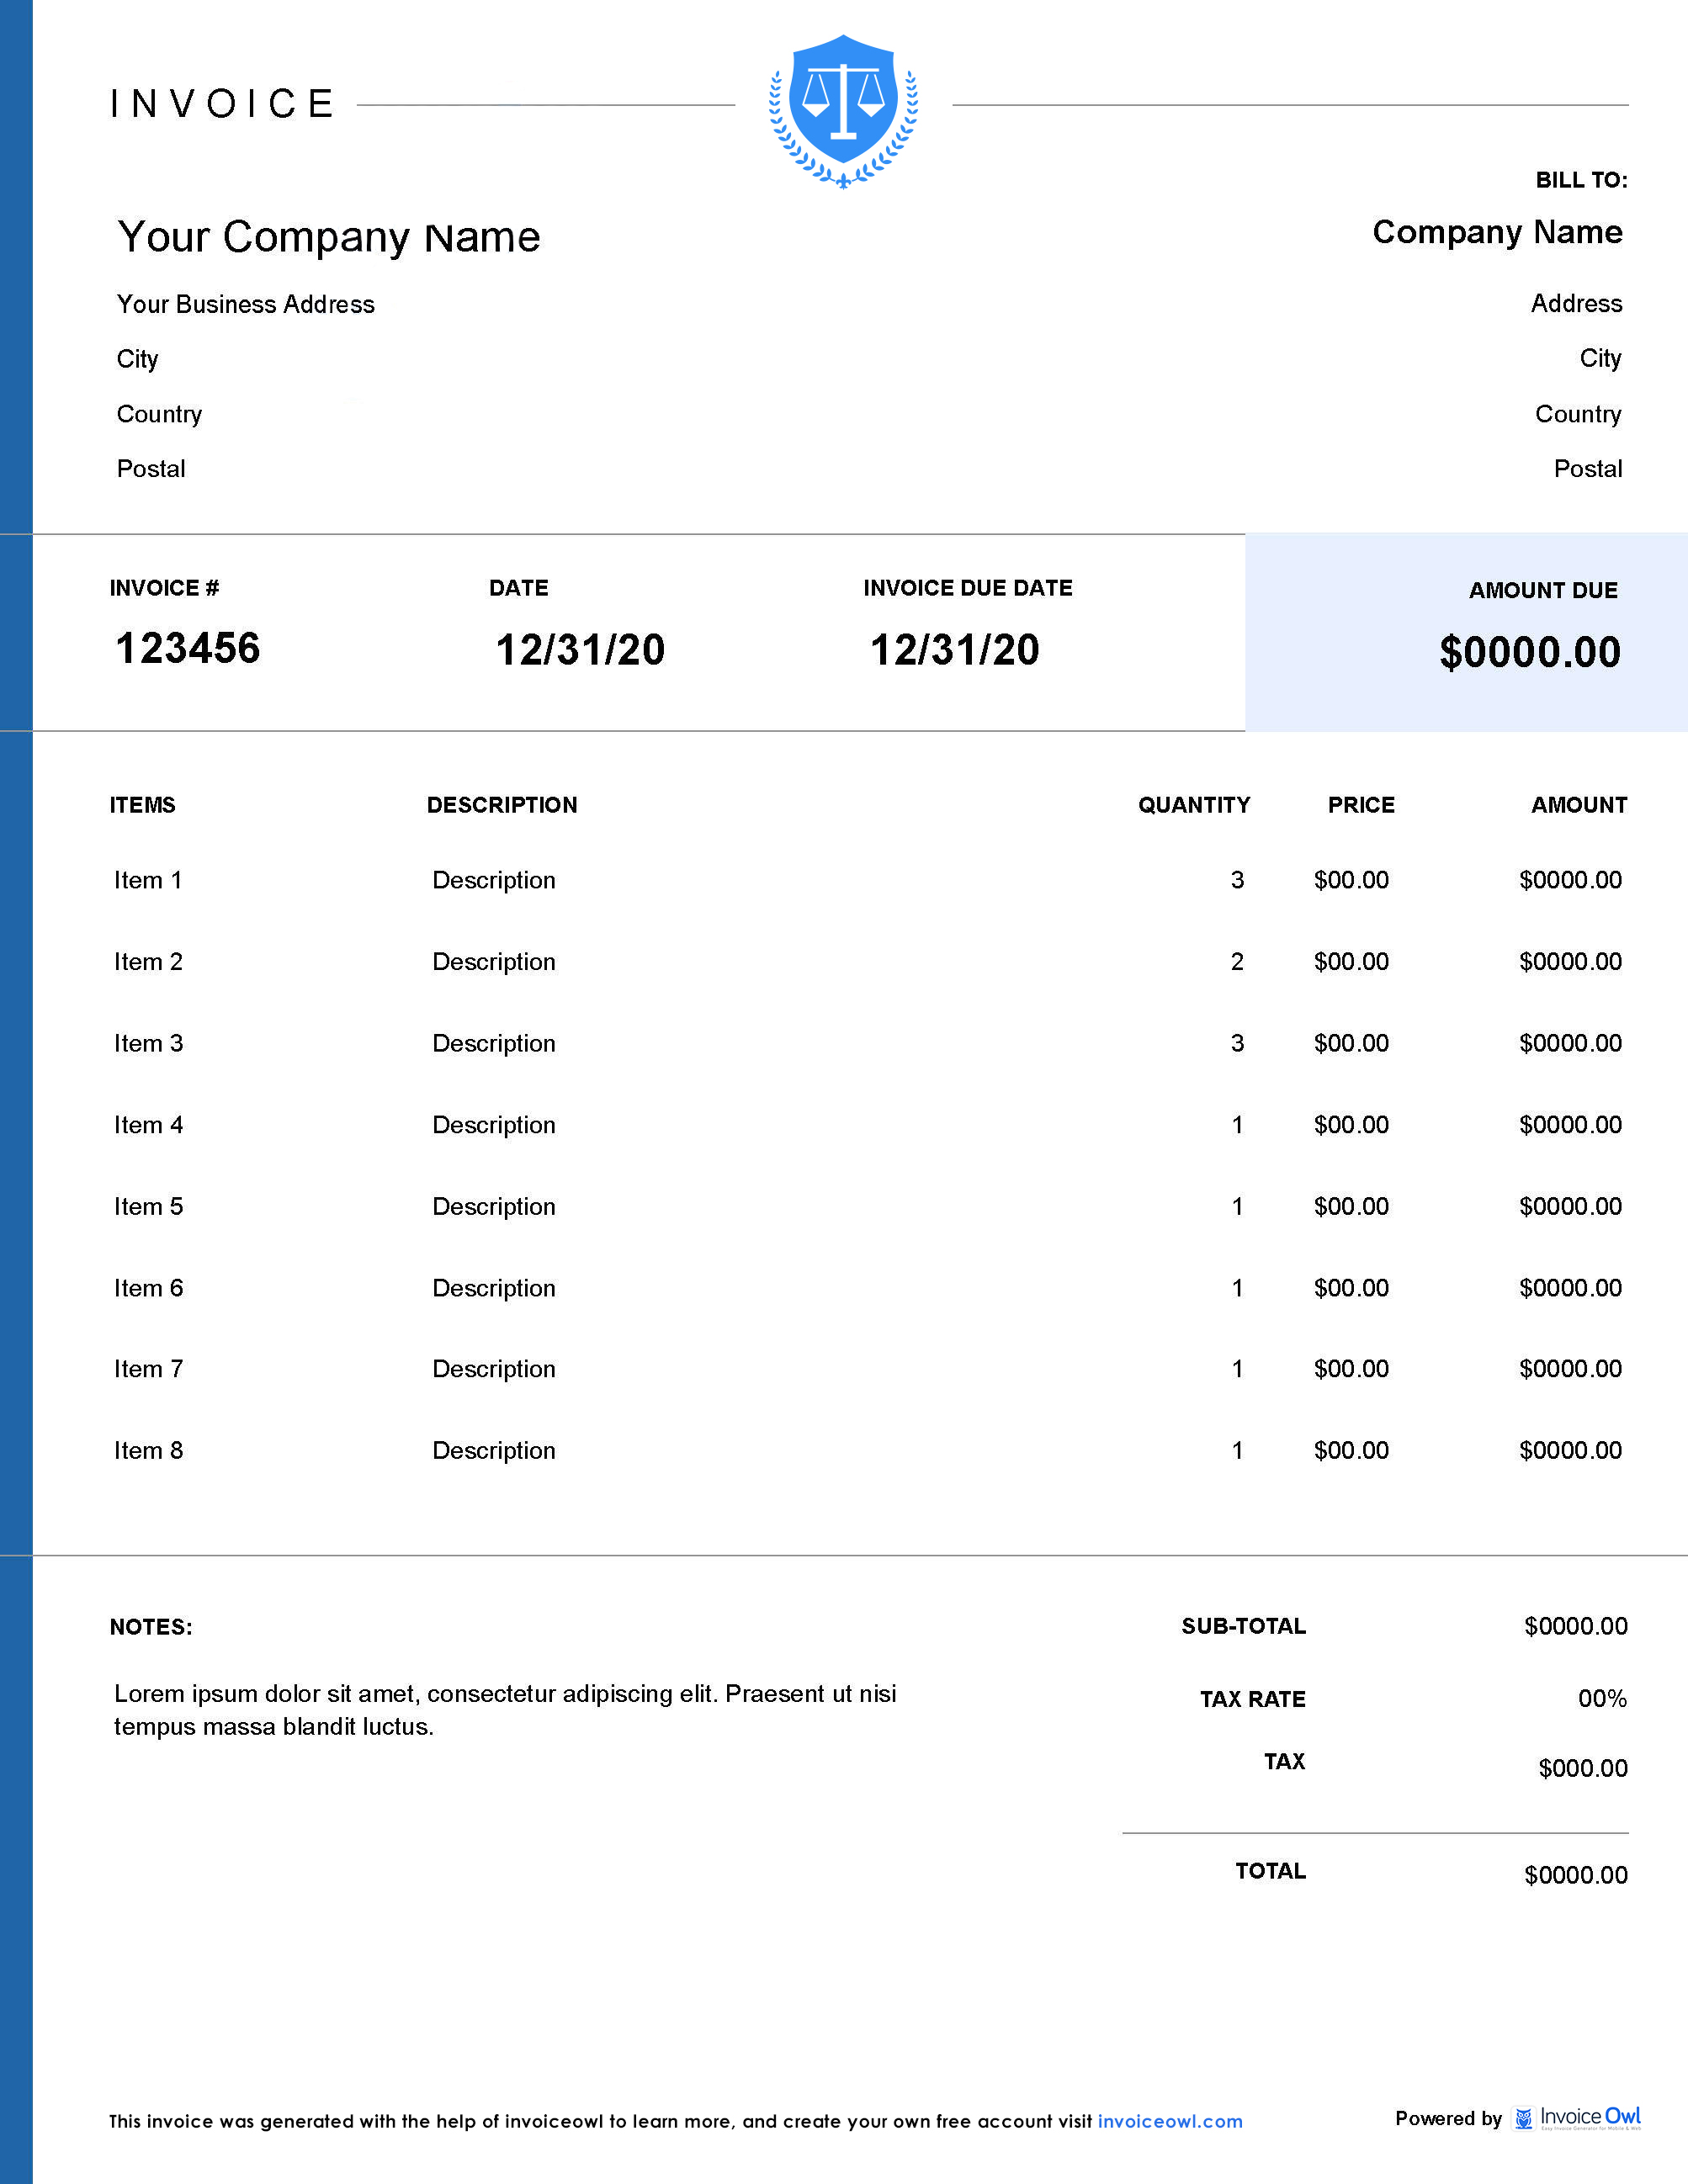 Download retainer fees invoice template